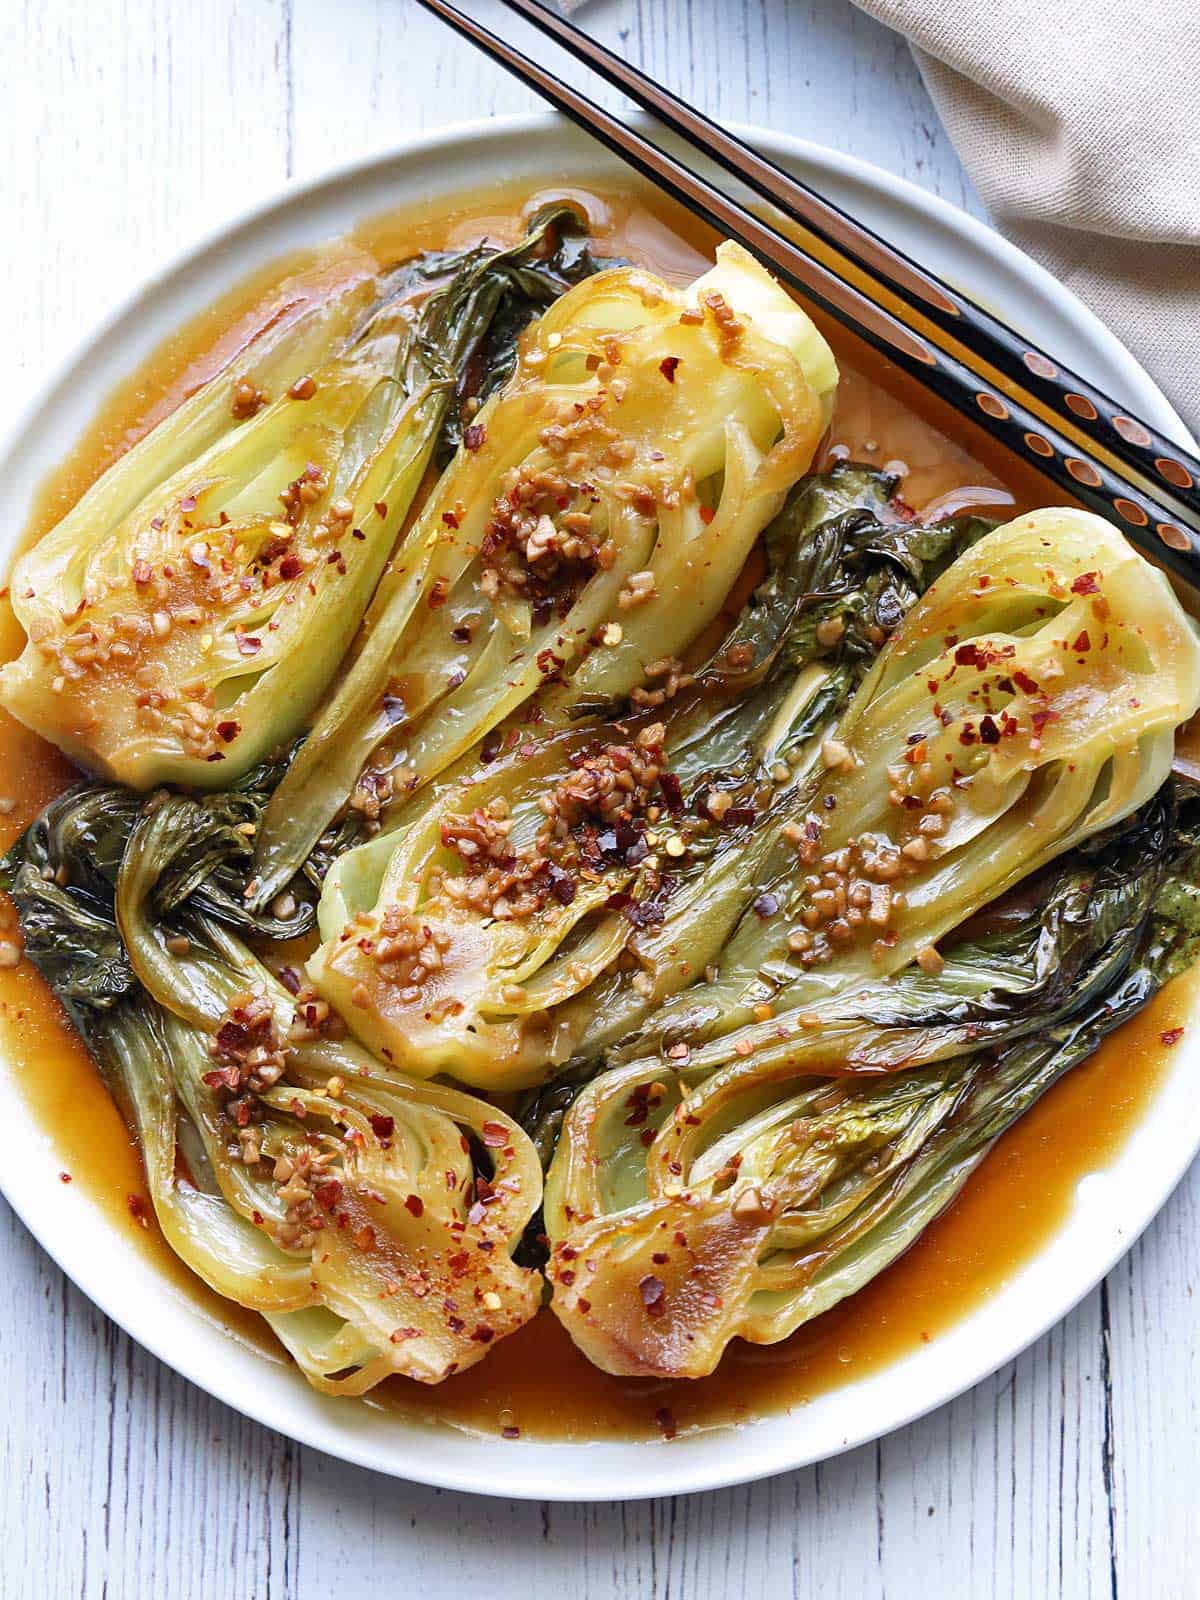 Sauteed bok choy is topped with red pepper flakes. 